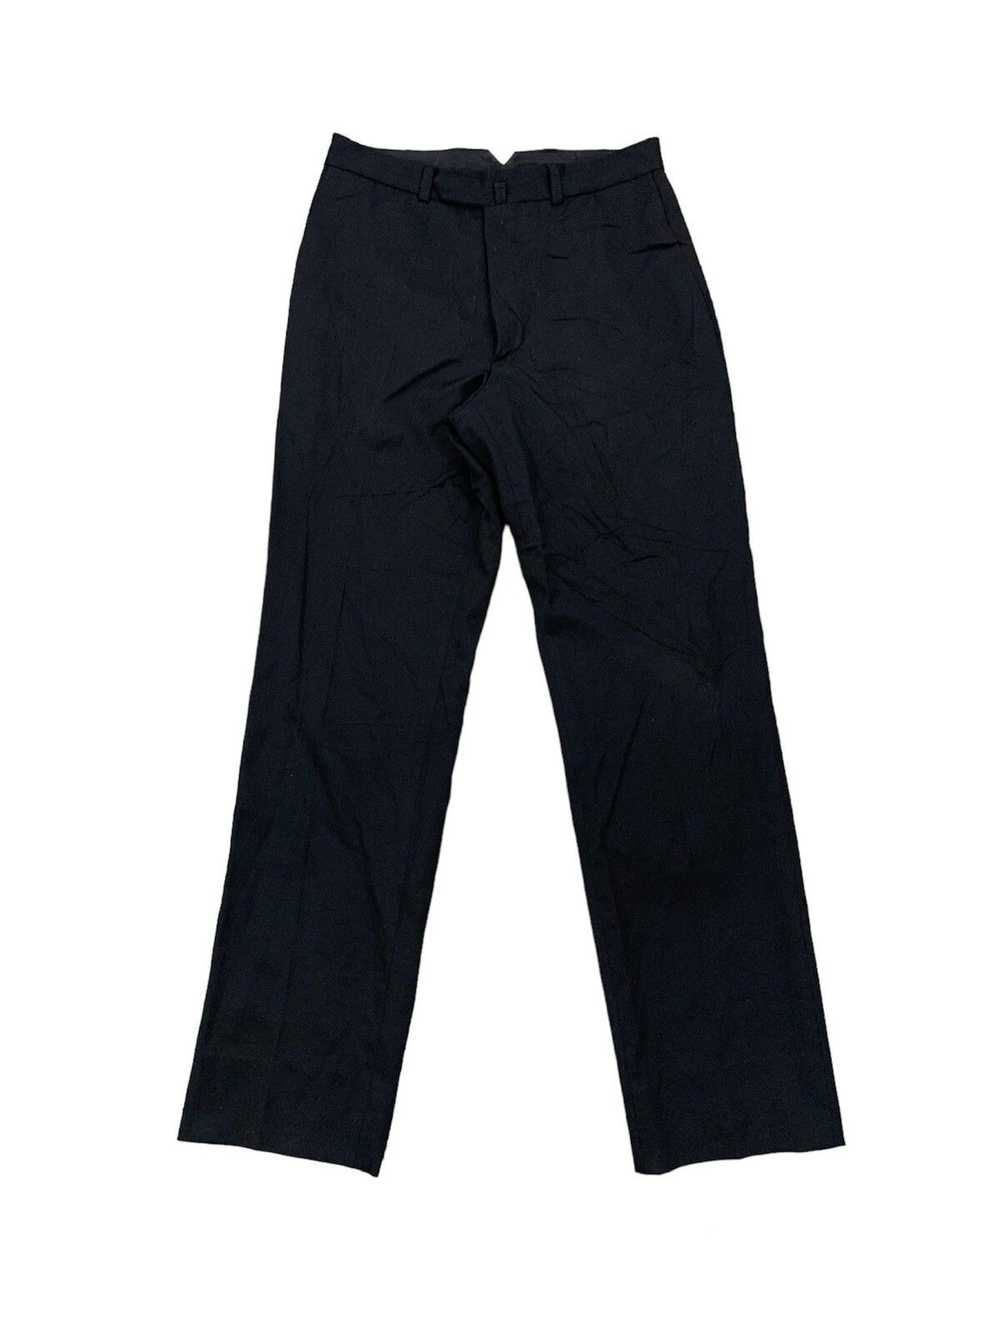 Agnes B. Agnes B Homme Paris Wool Pants Made in F… - image 1